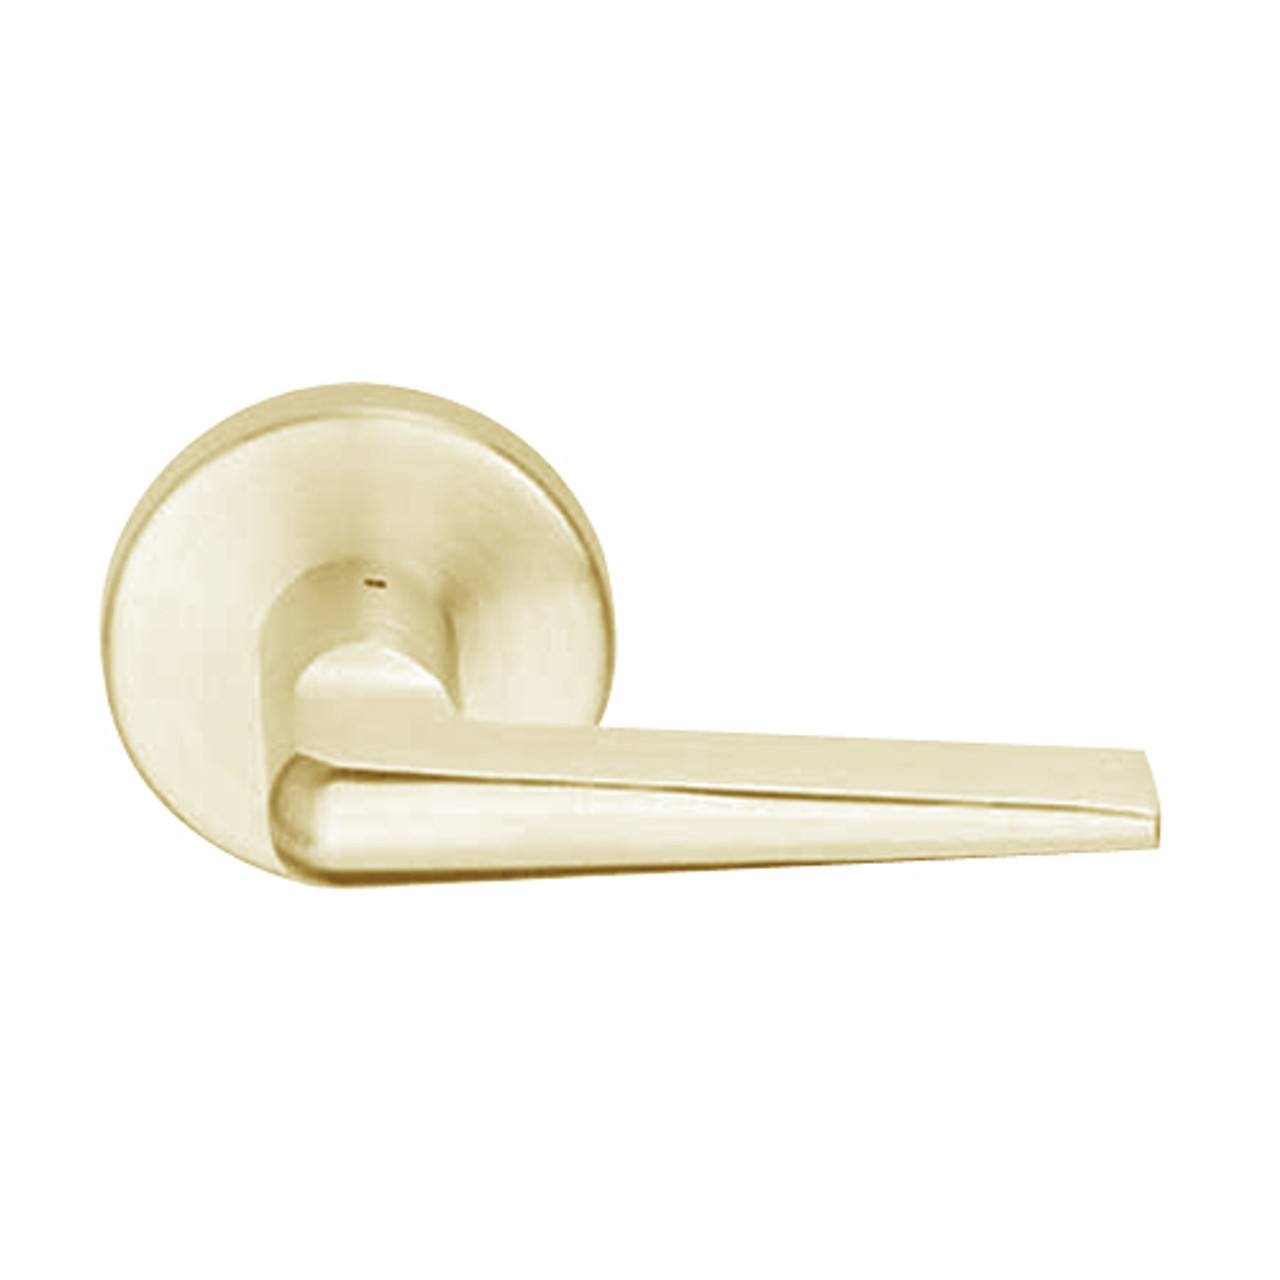 L9070J-05A-606 Schlage L Series Classroom Commercial Mortise Lock with 05 Cast Lever Design Prepped for FSIC in Satin Brass